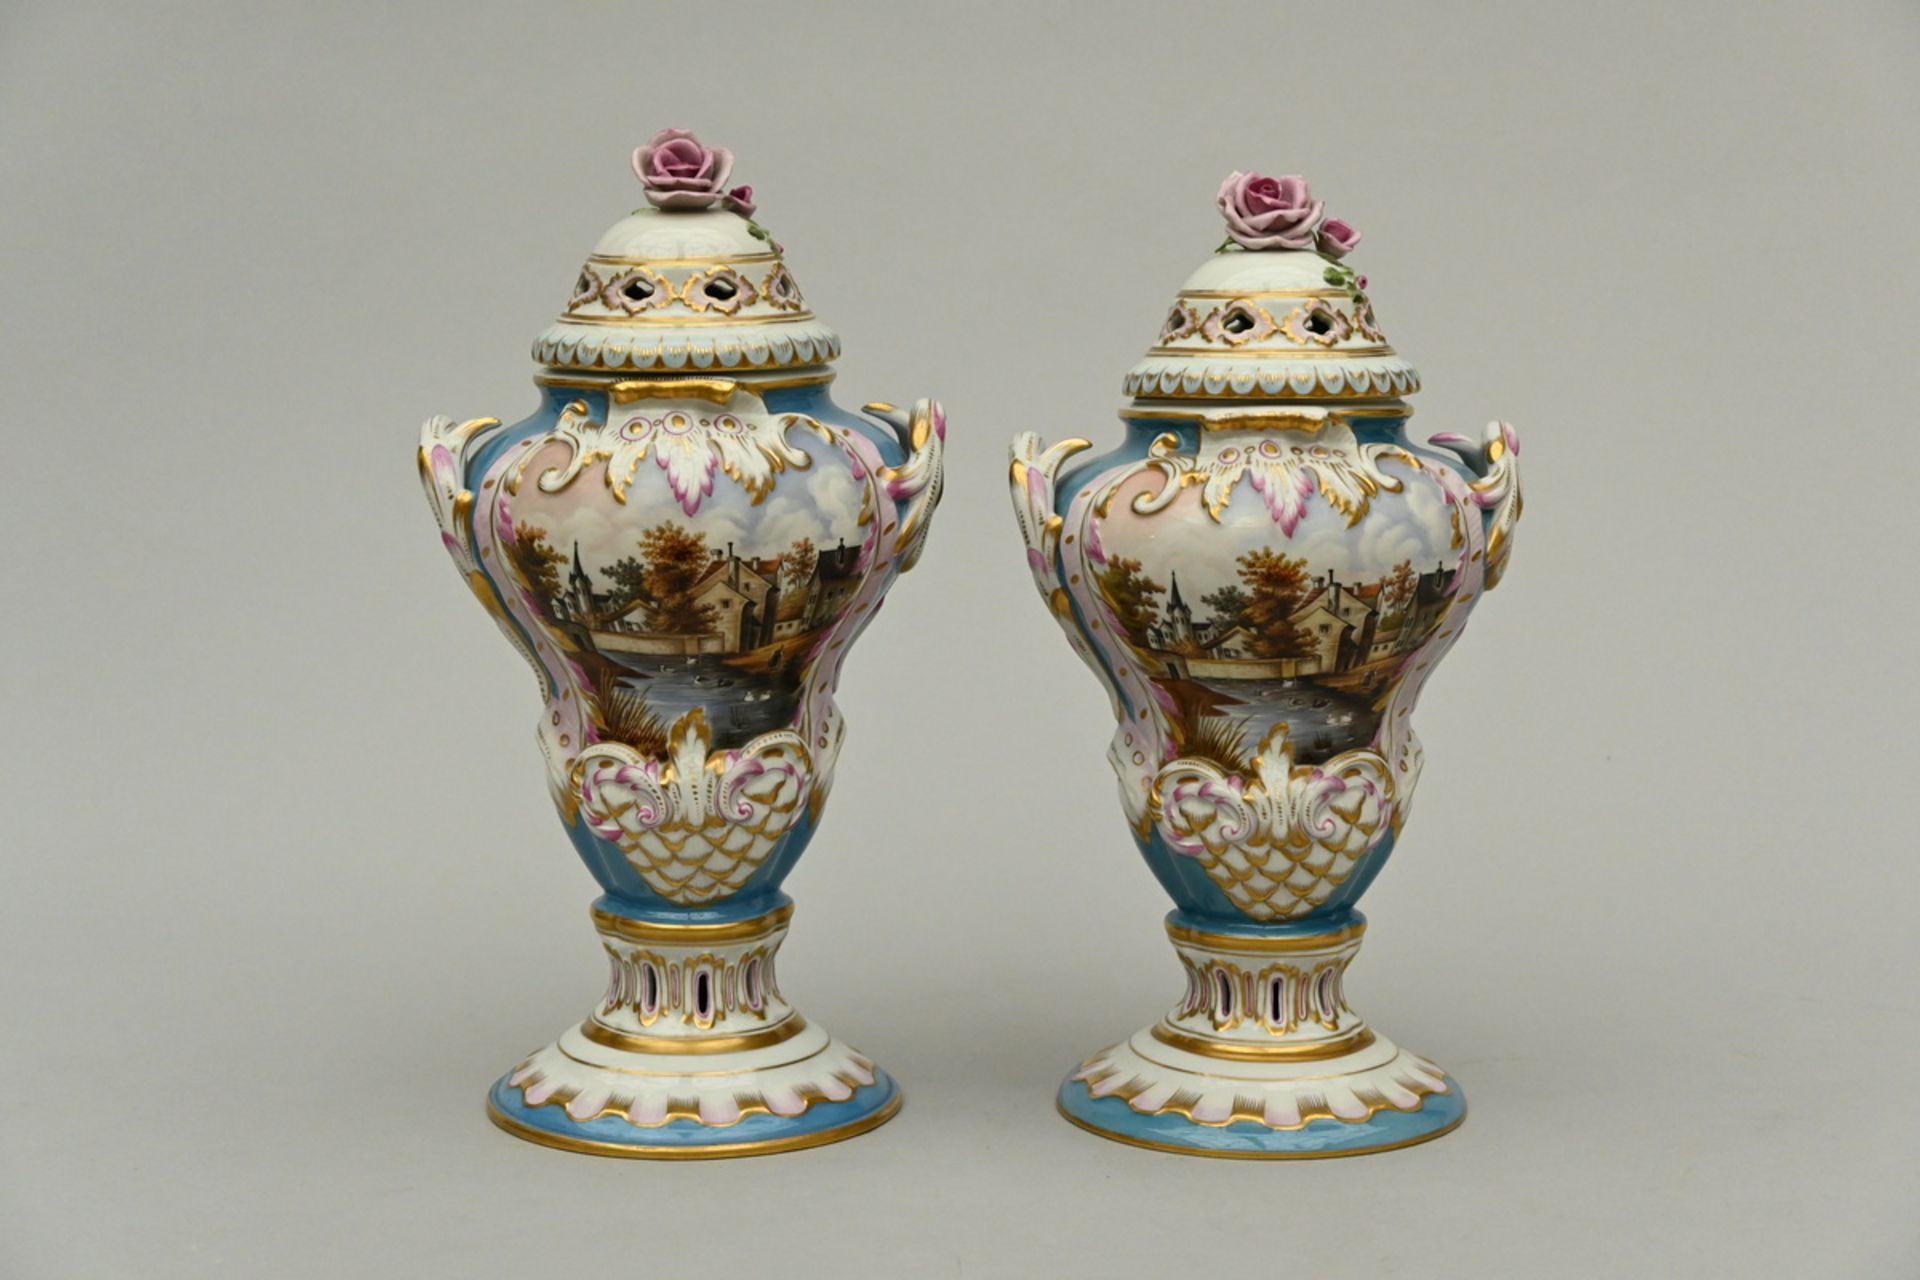 Two Louis XV style vases in Herend porcelain, Hungary (h36-38cm)